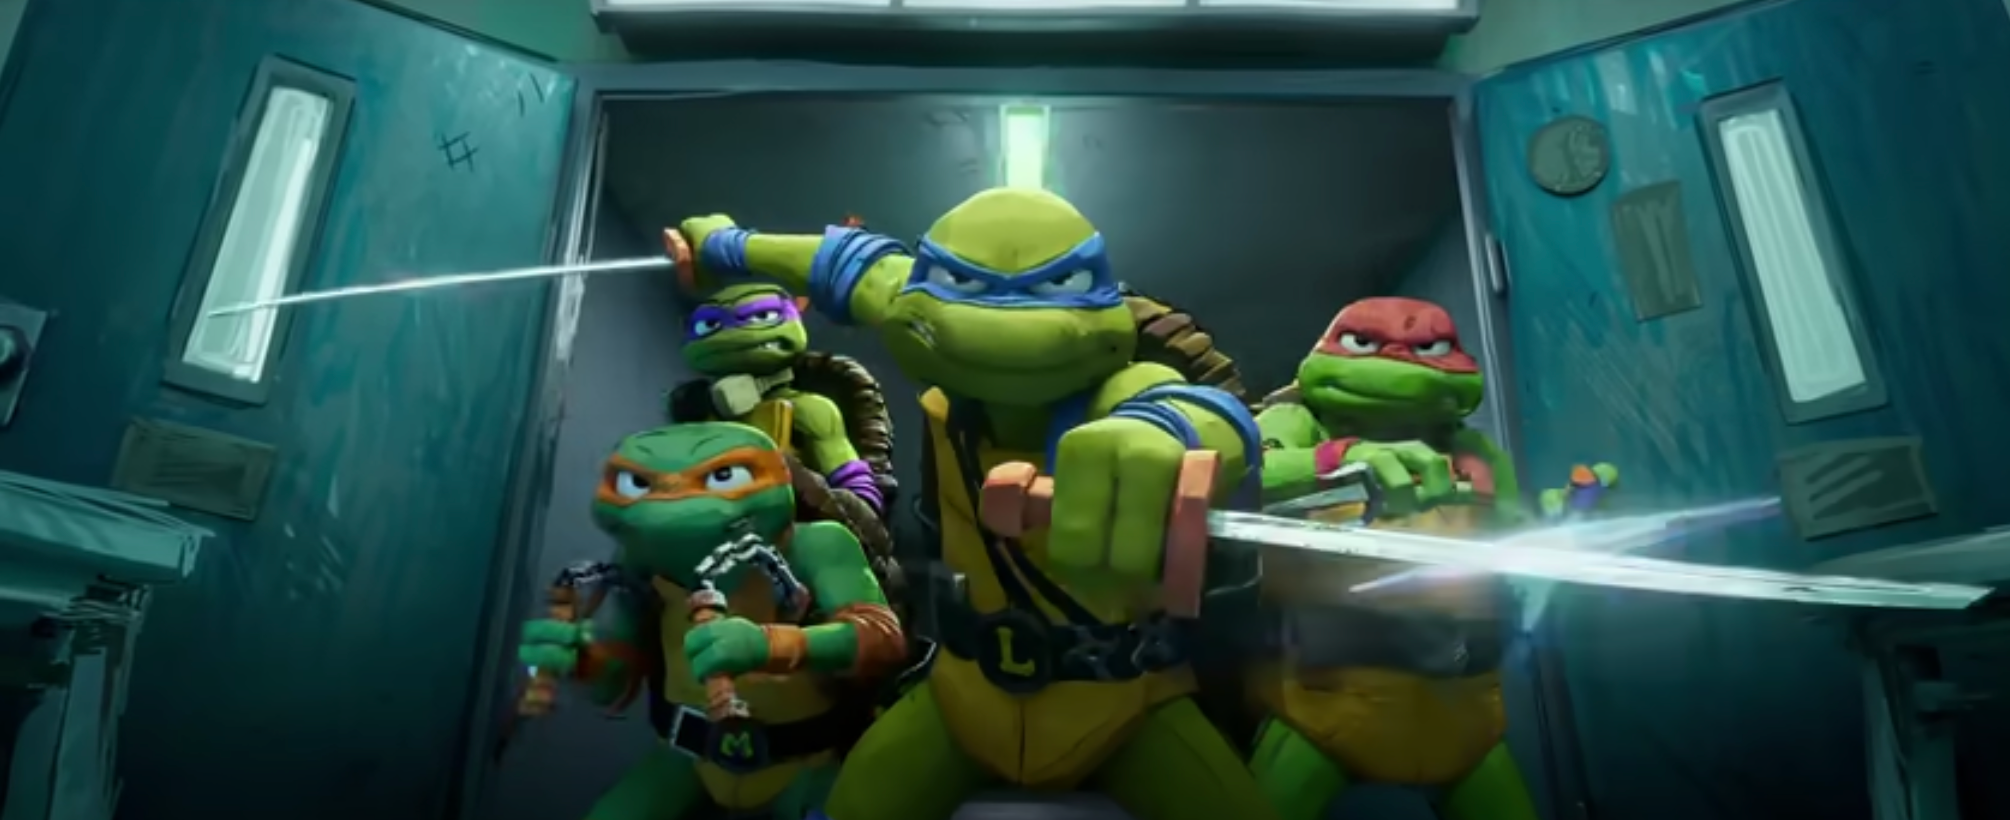 The amount of variety in Rise of the Teenage Mutant Ninja Turtle's